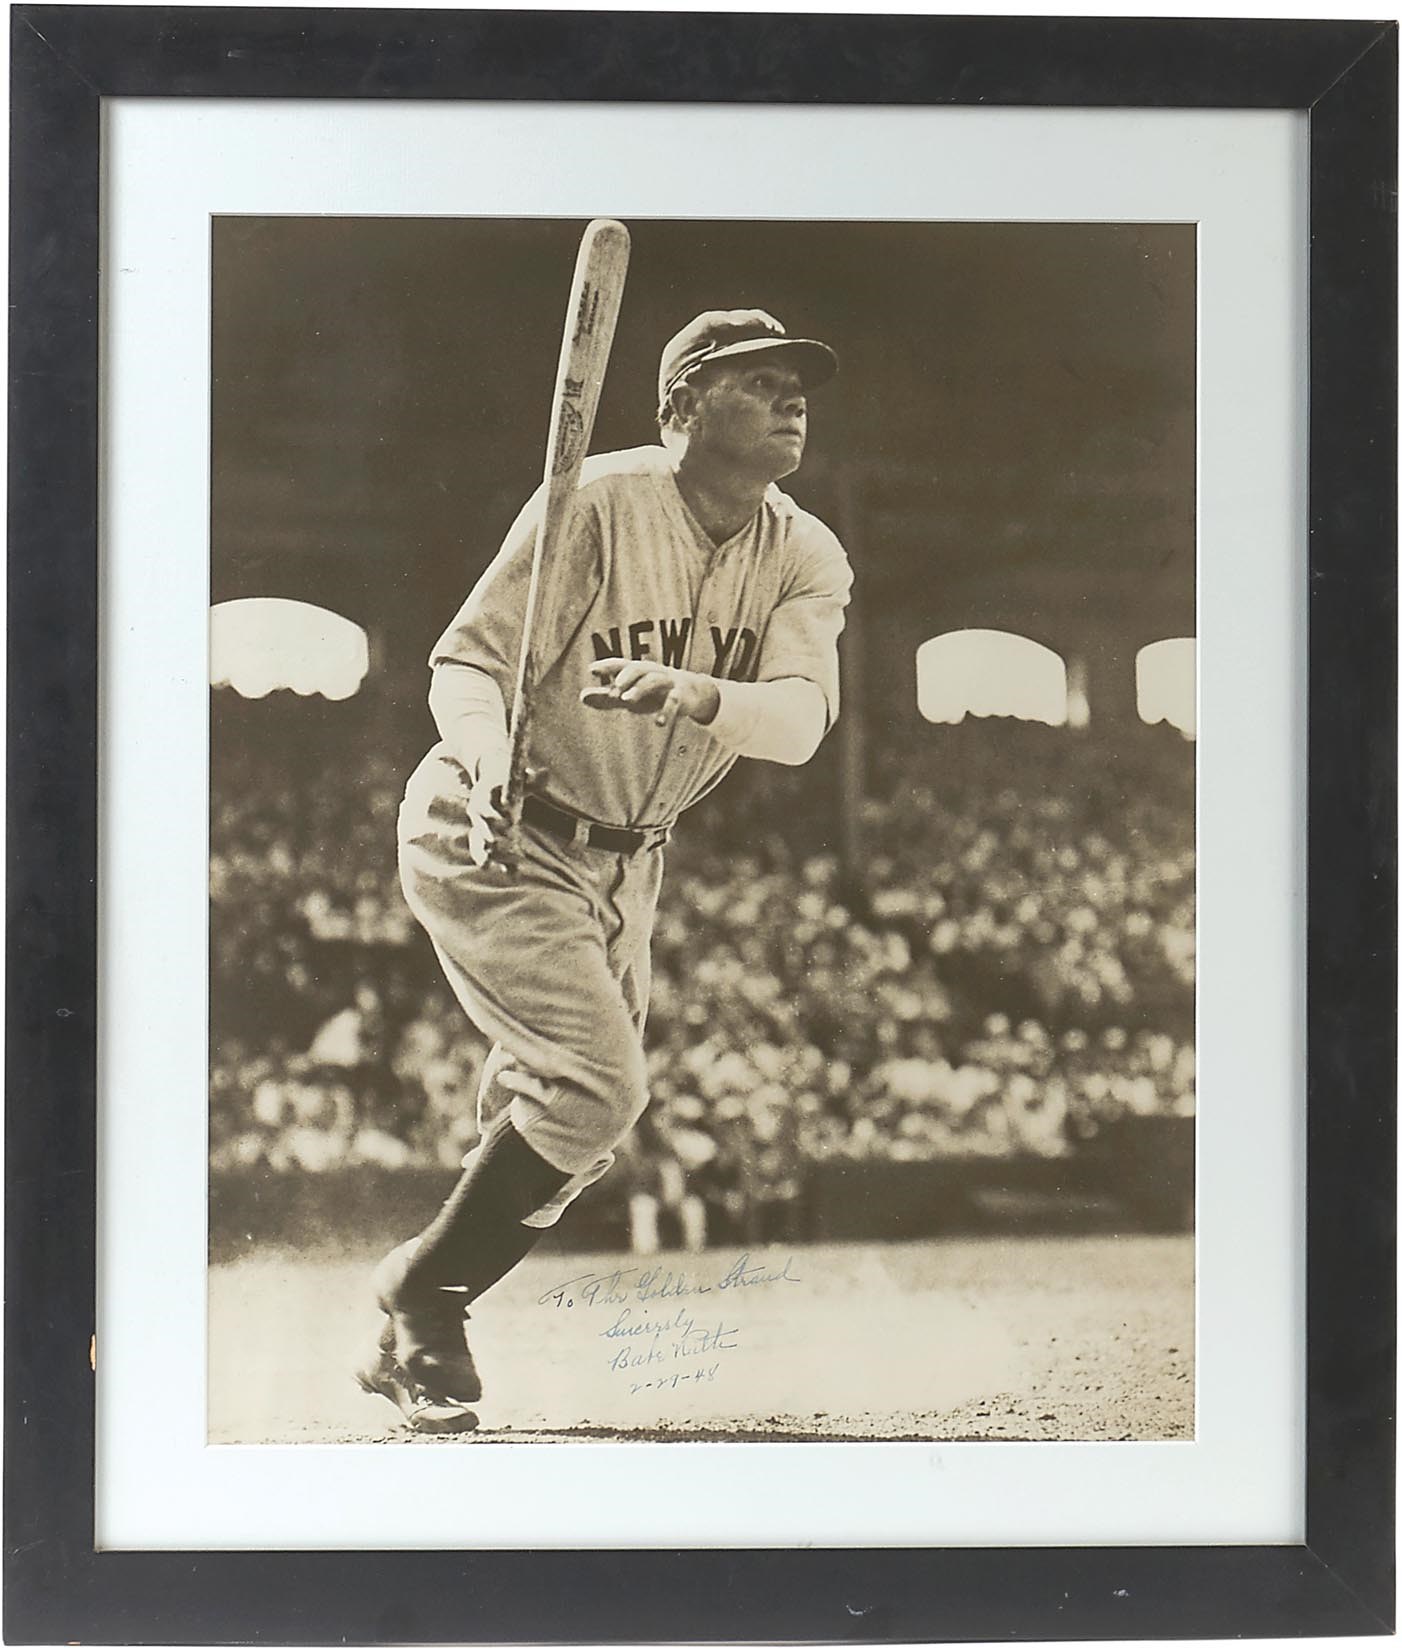 - Mammoth Babe Ruth "Golden Strand" Signed Photograph